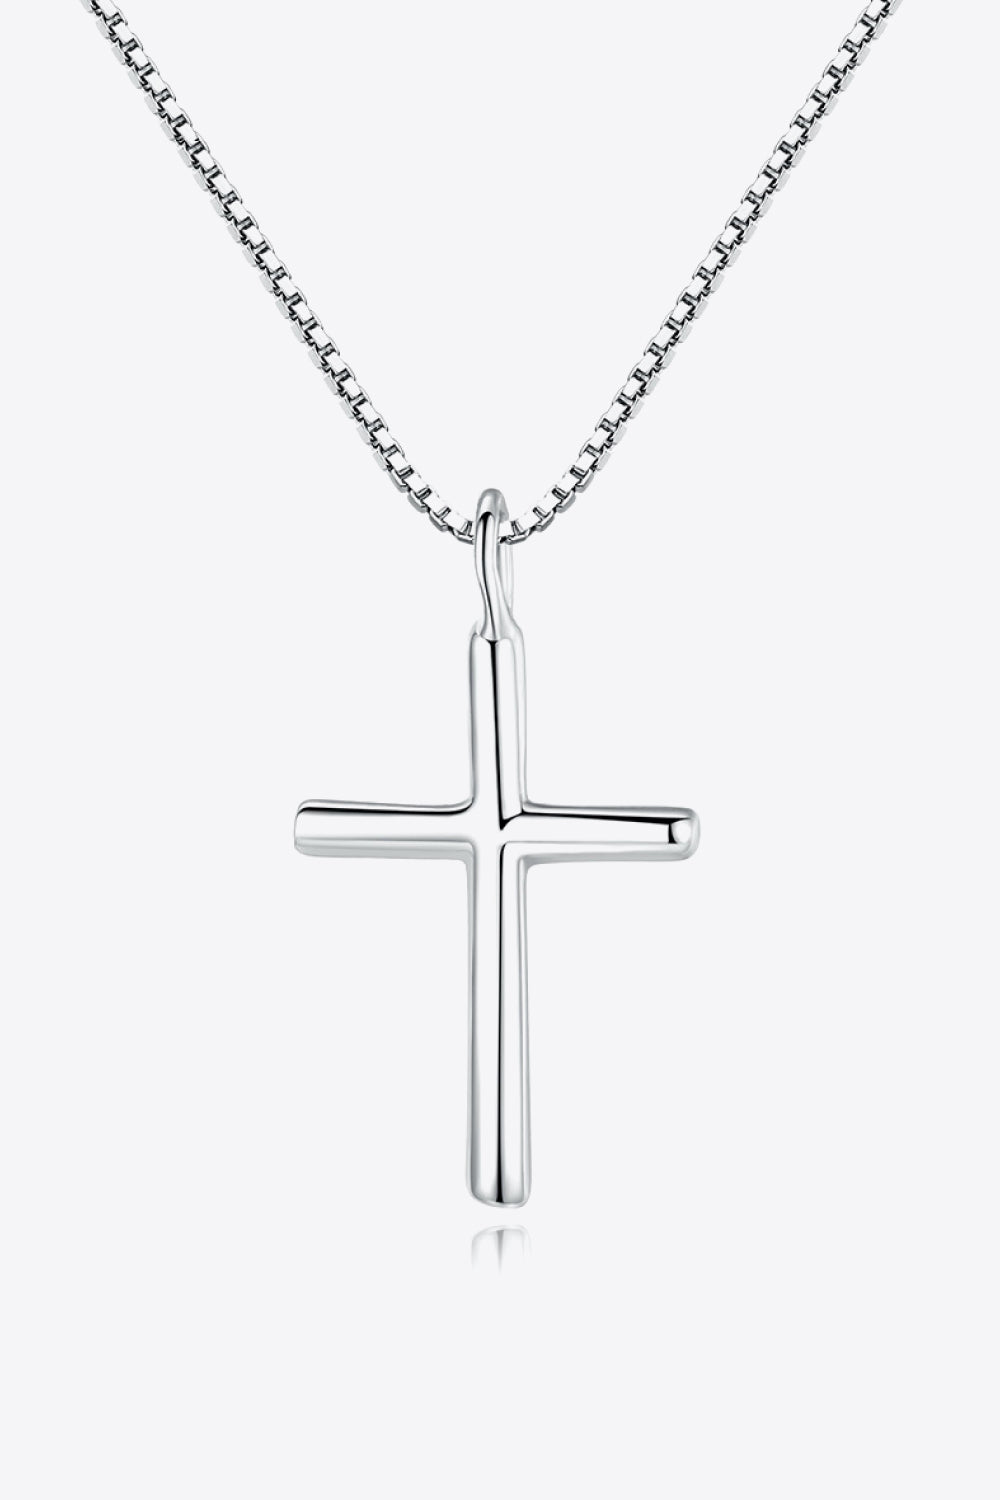 Trendsi Cupid Beauty Supplies Women Necklace Cross Pendant 925 Sterling Silver Necklace